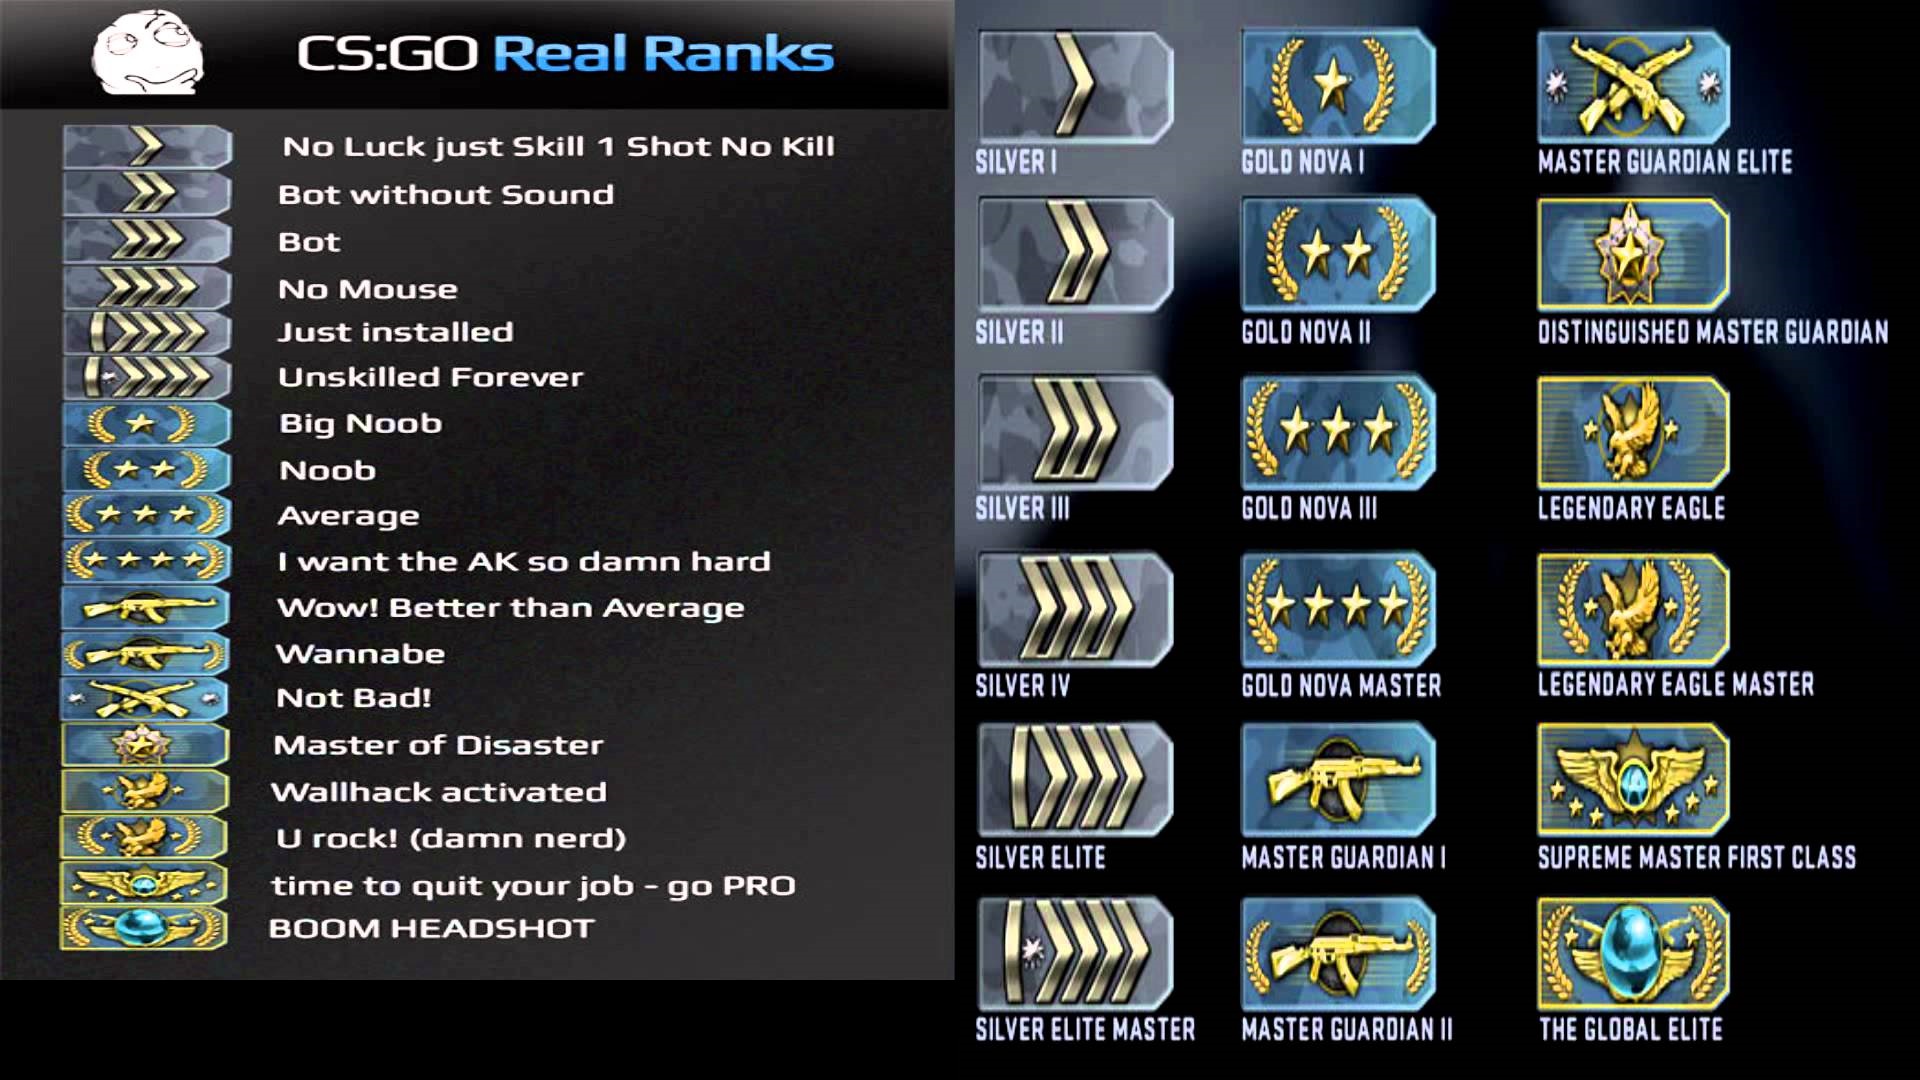 tsb gaming rank structure